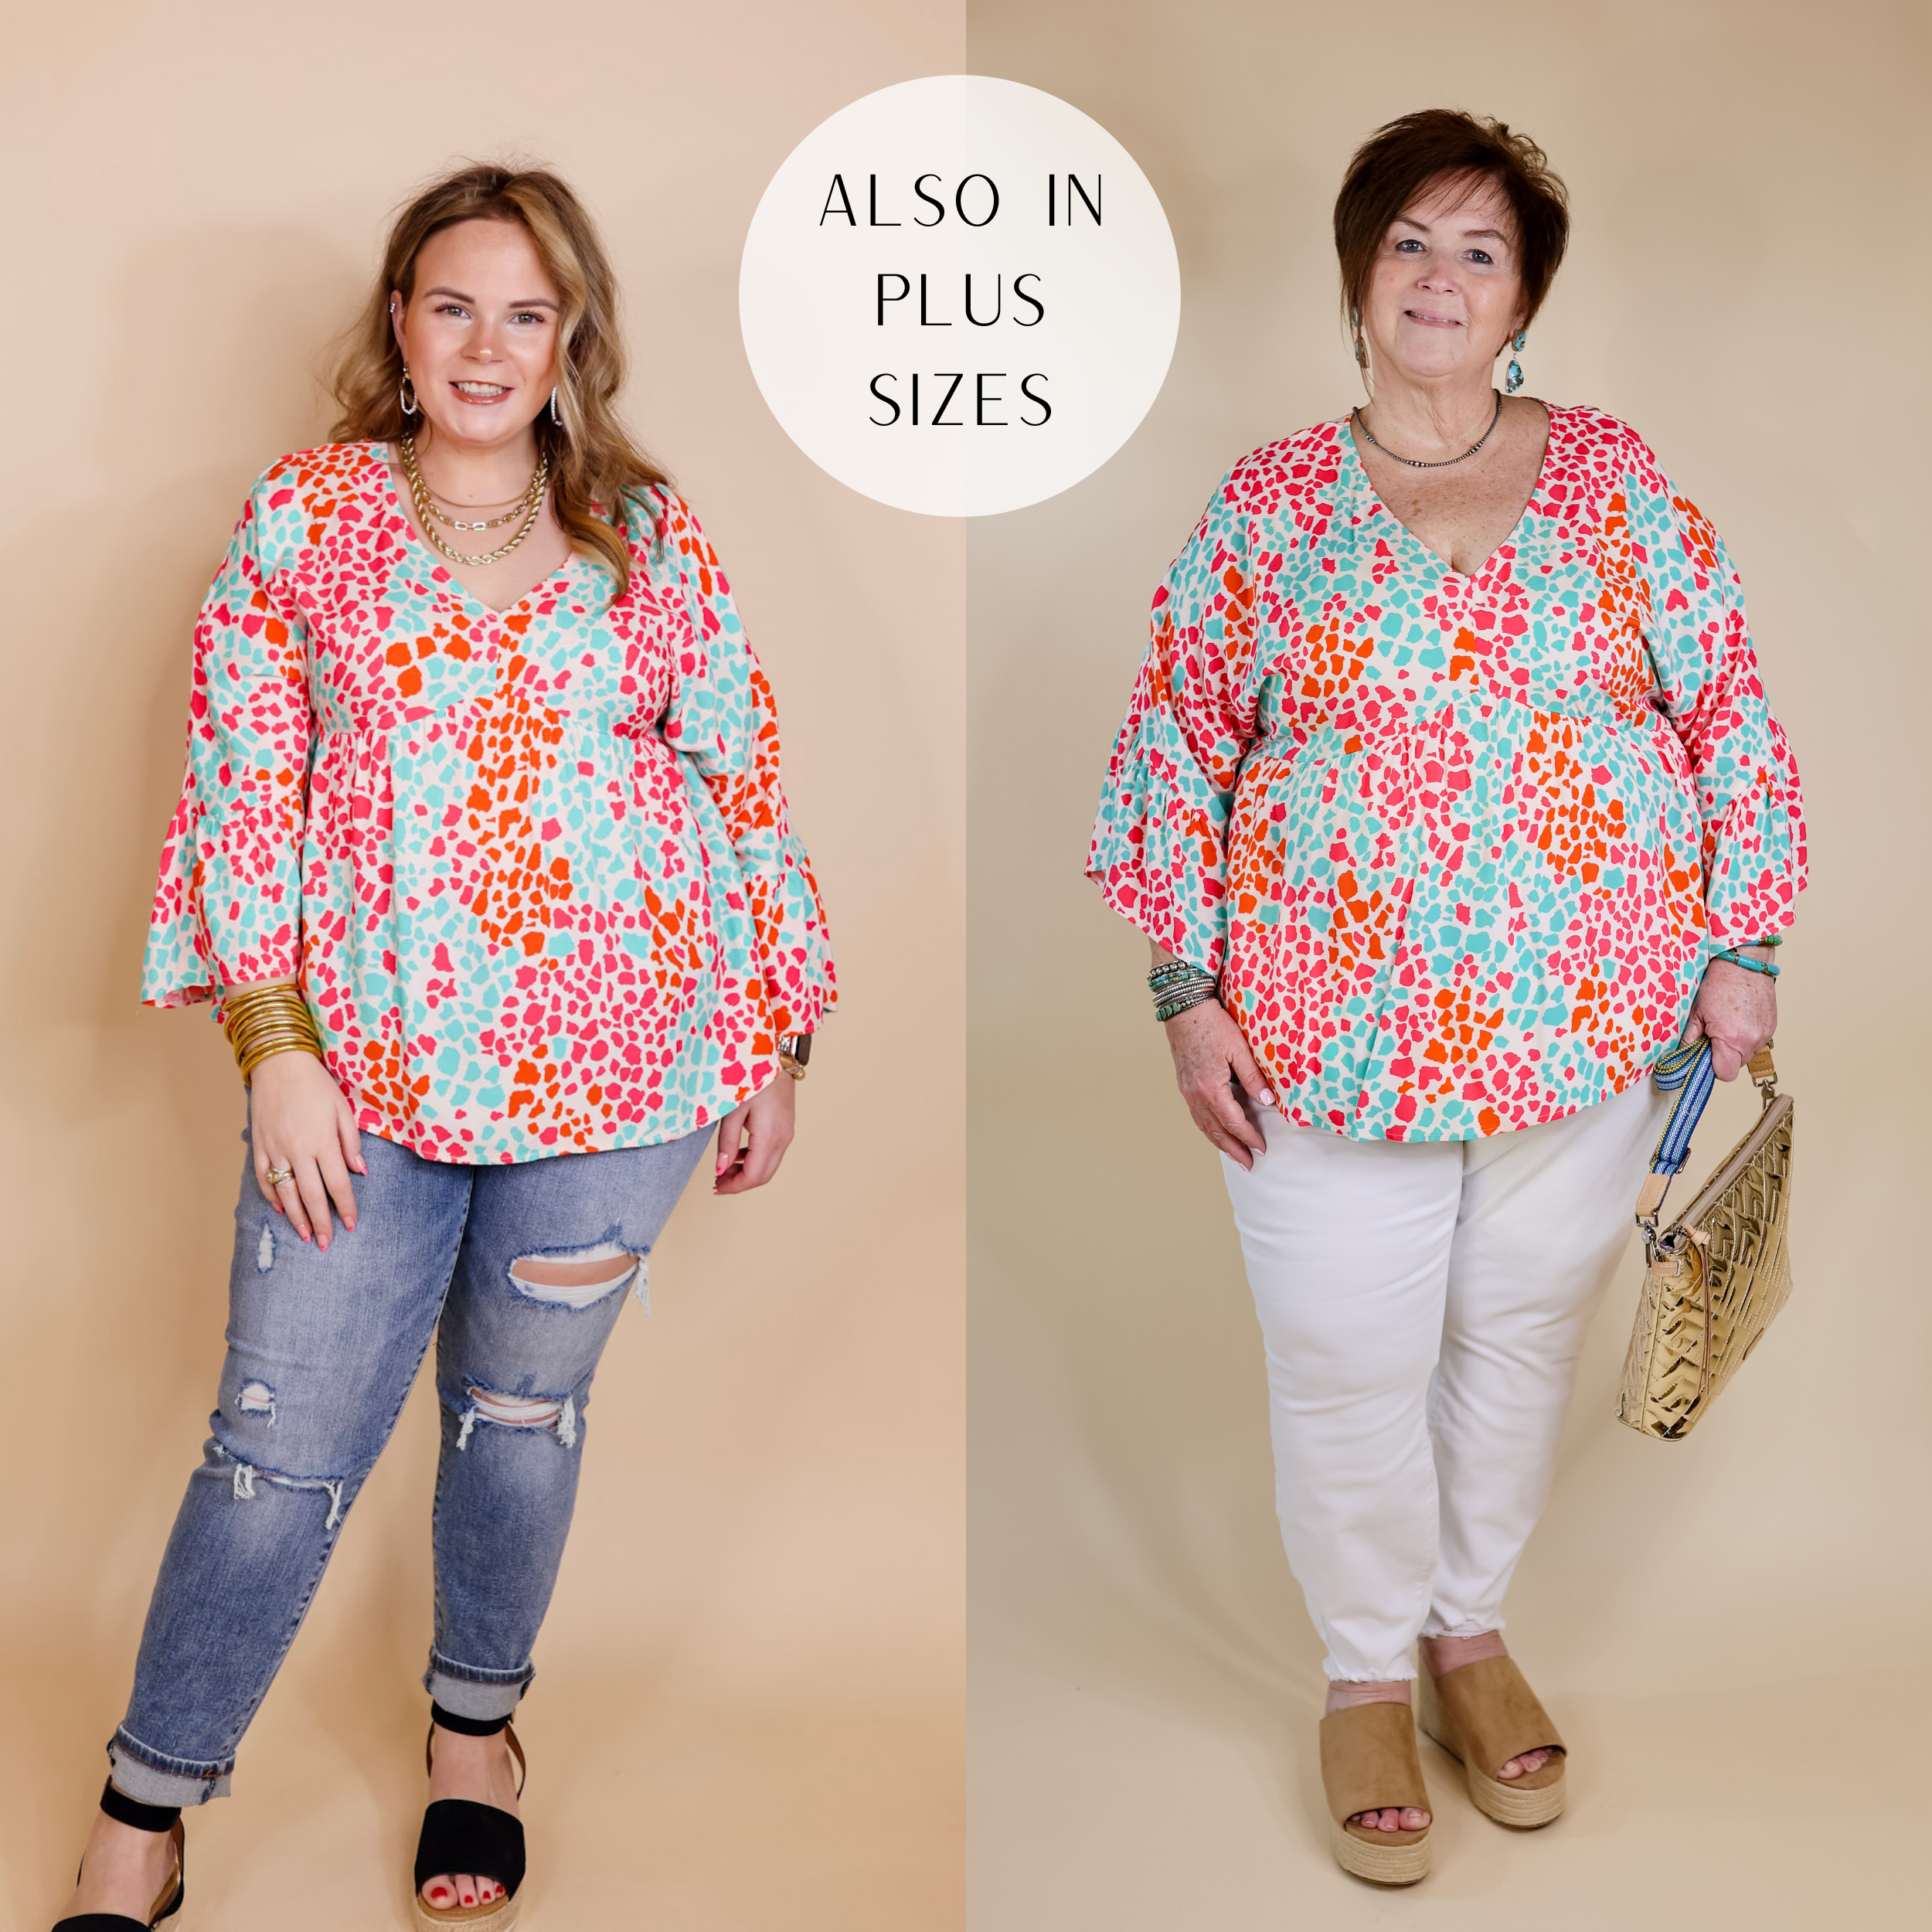 Model is wearing a dotted print babydoll top that is a mix of hot pink, orange, and turquoise. This top has a v neckline and ruffle 3/4 sleeves. Model has this top paired with distressed skinny jeans, black sandals, and gold jewelry.